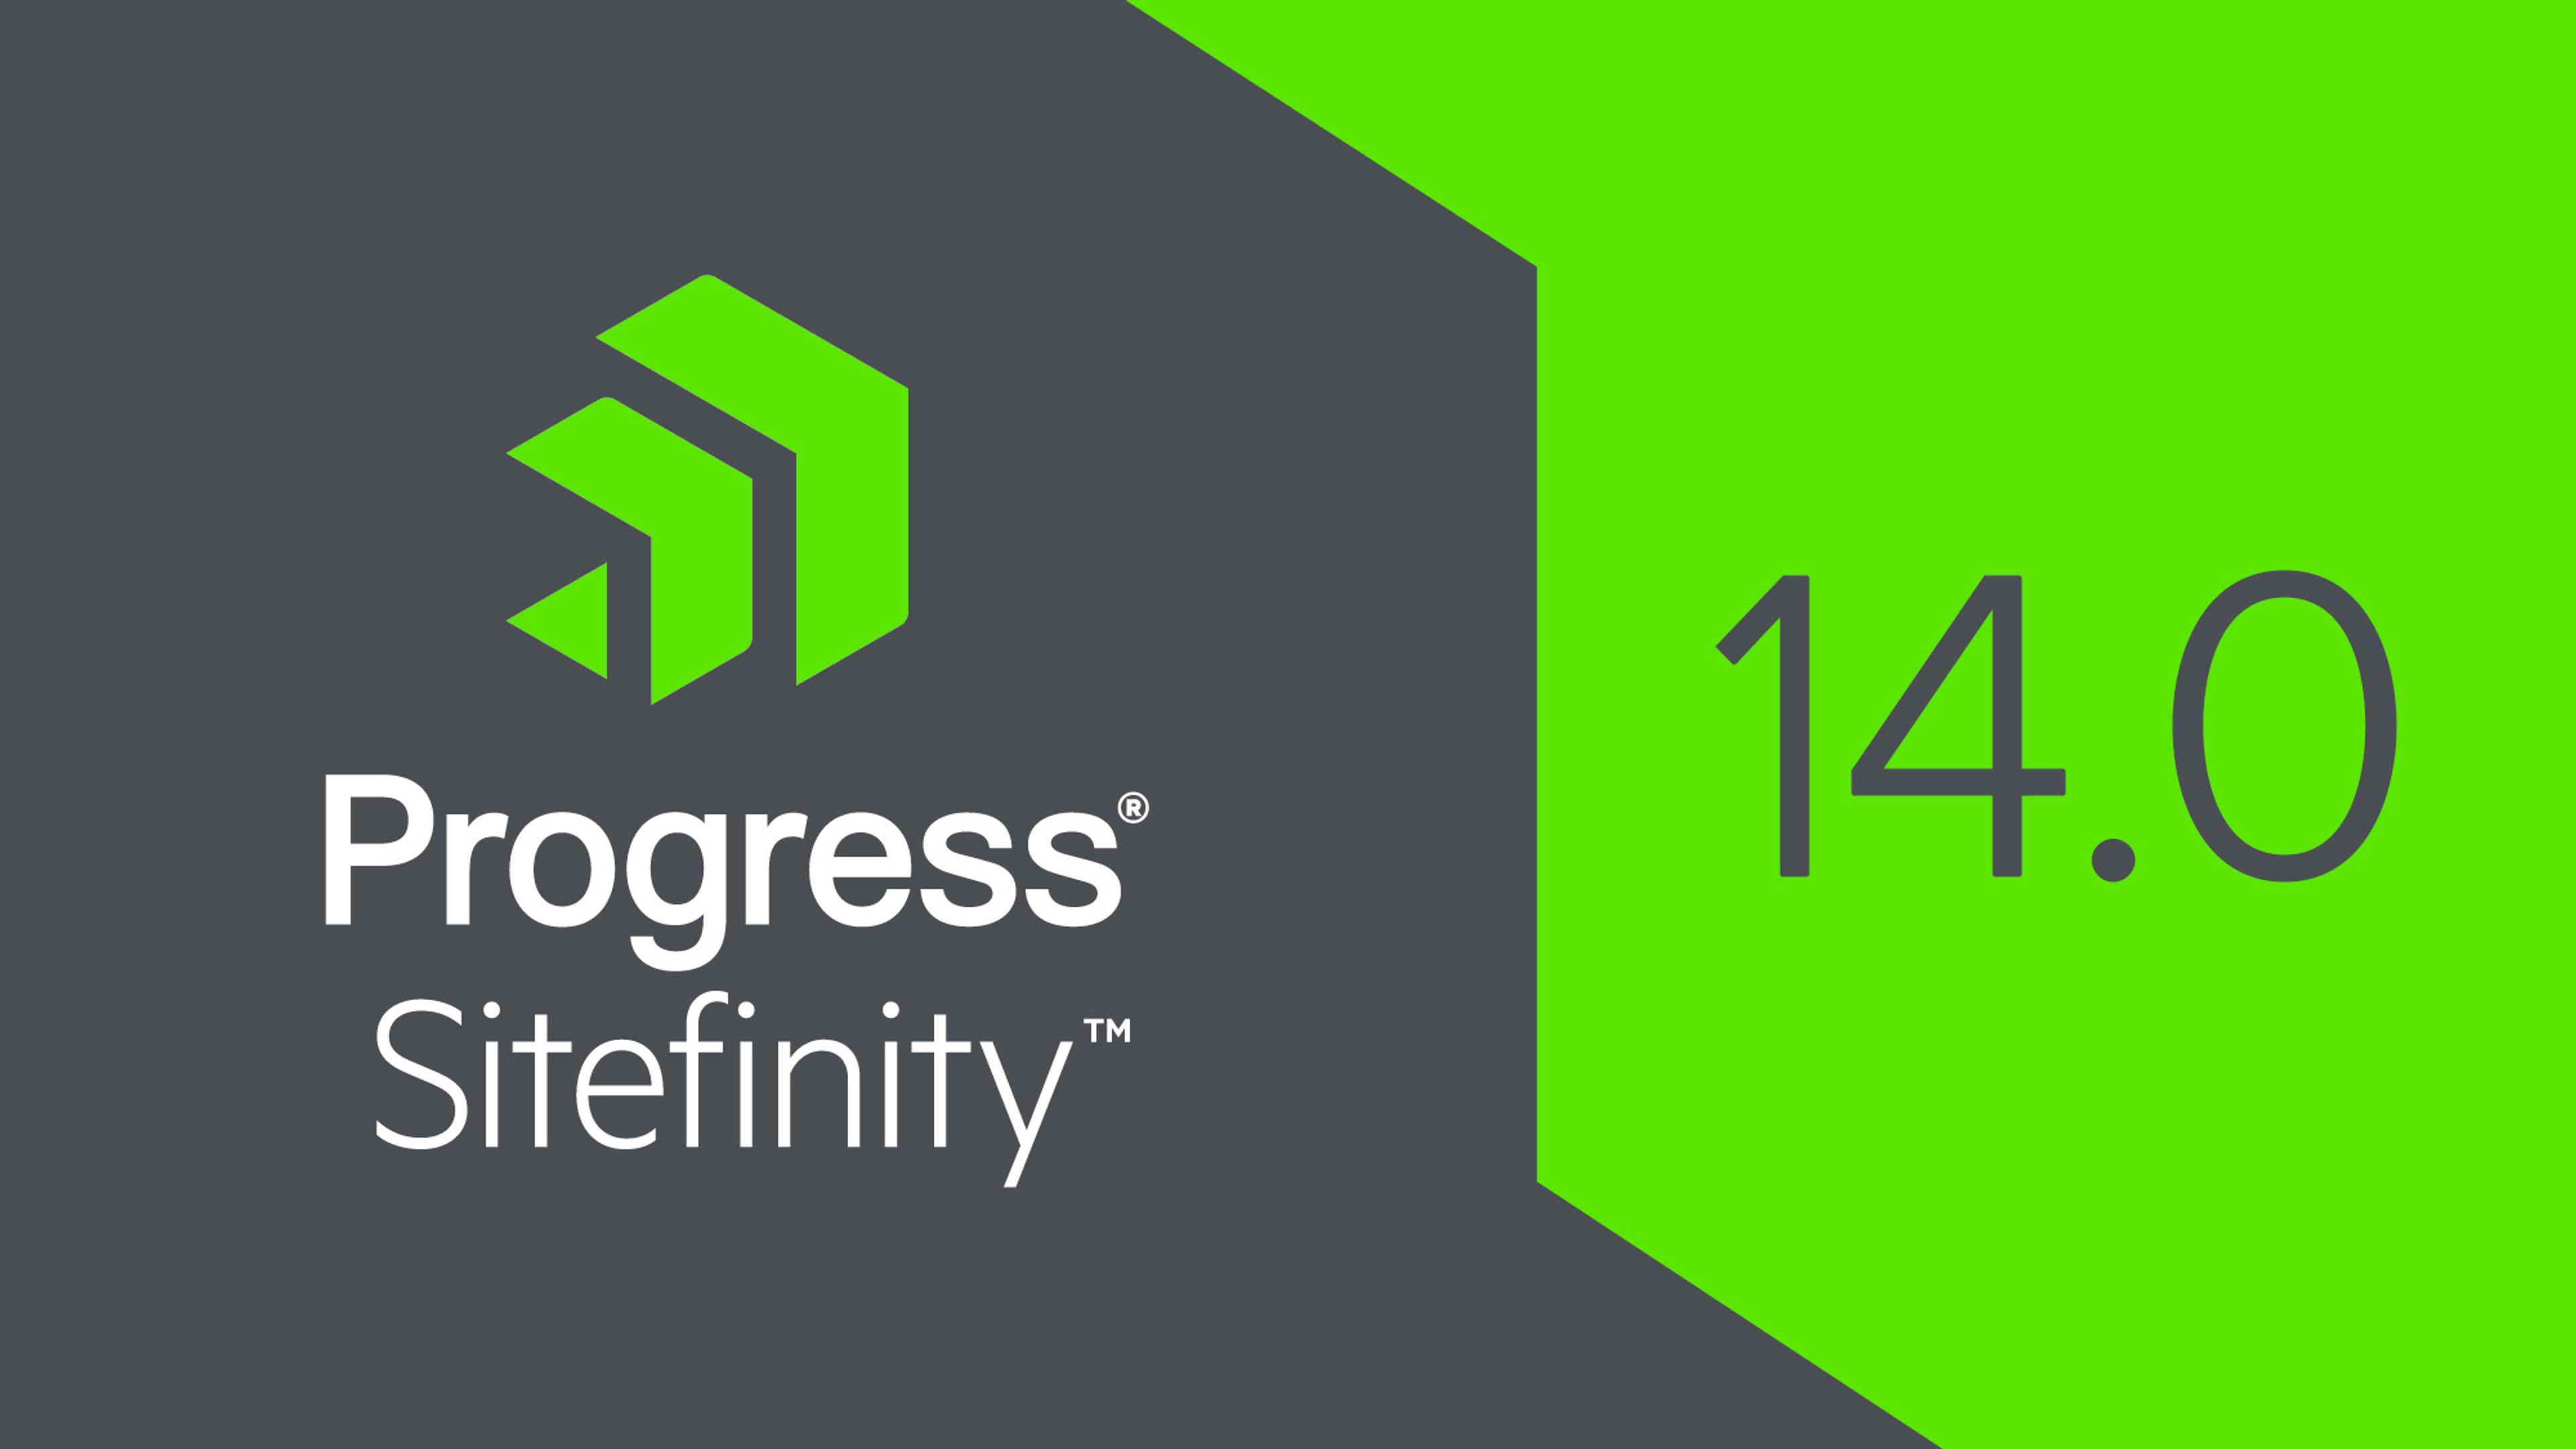 Progress Sitefinity logo with 14.0 version number